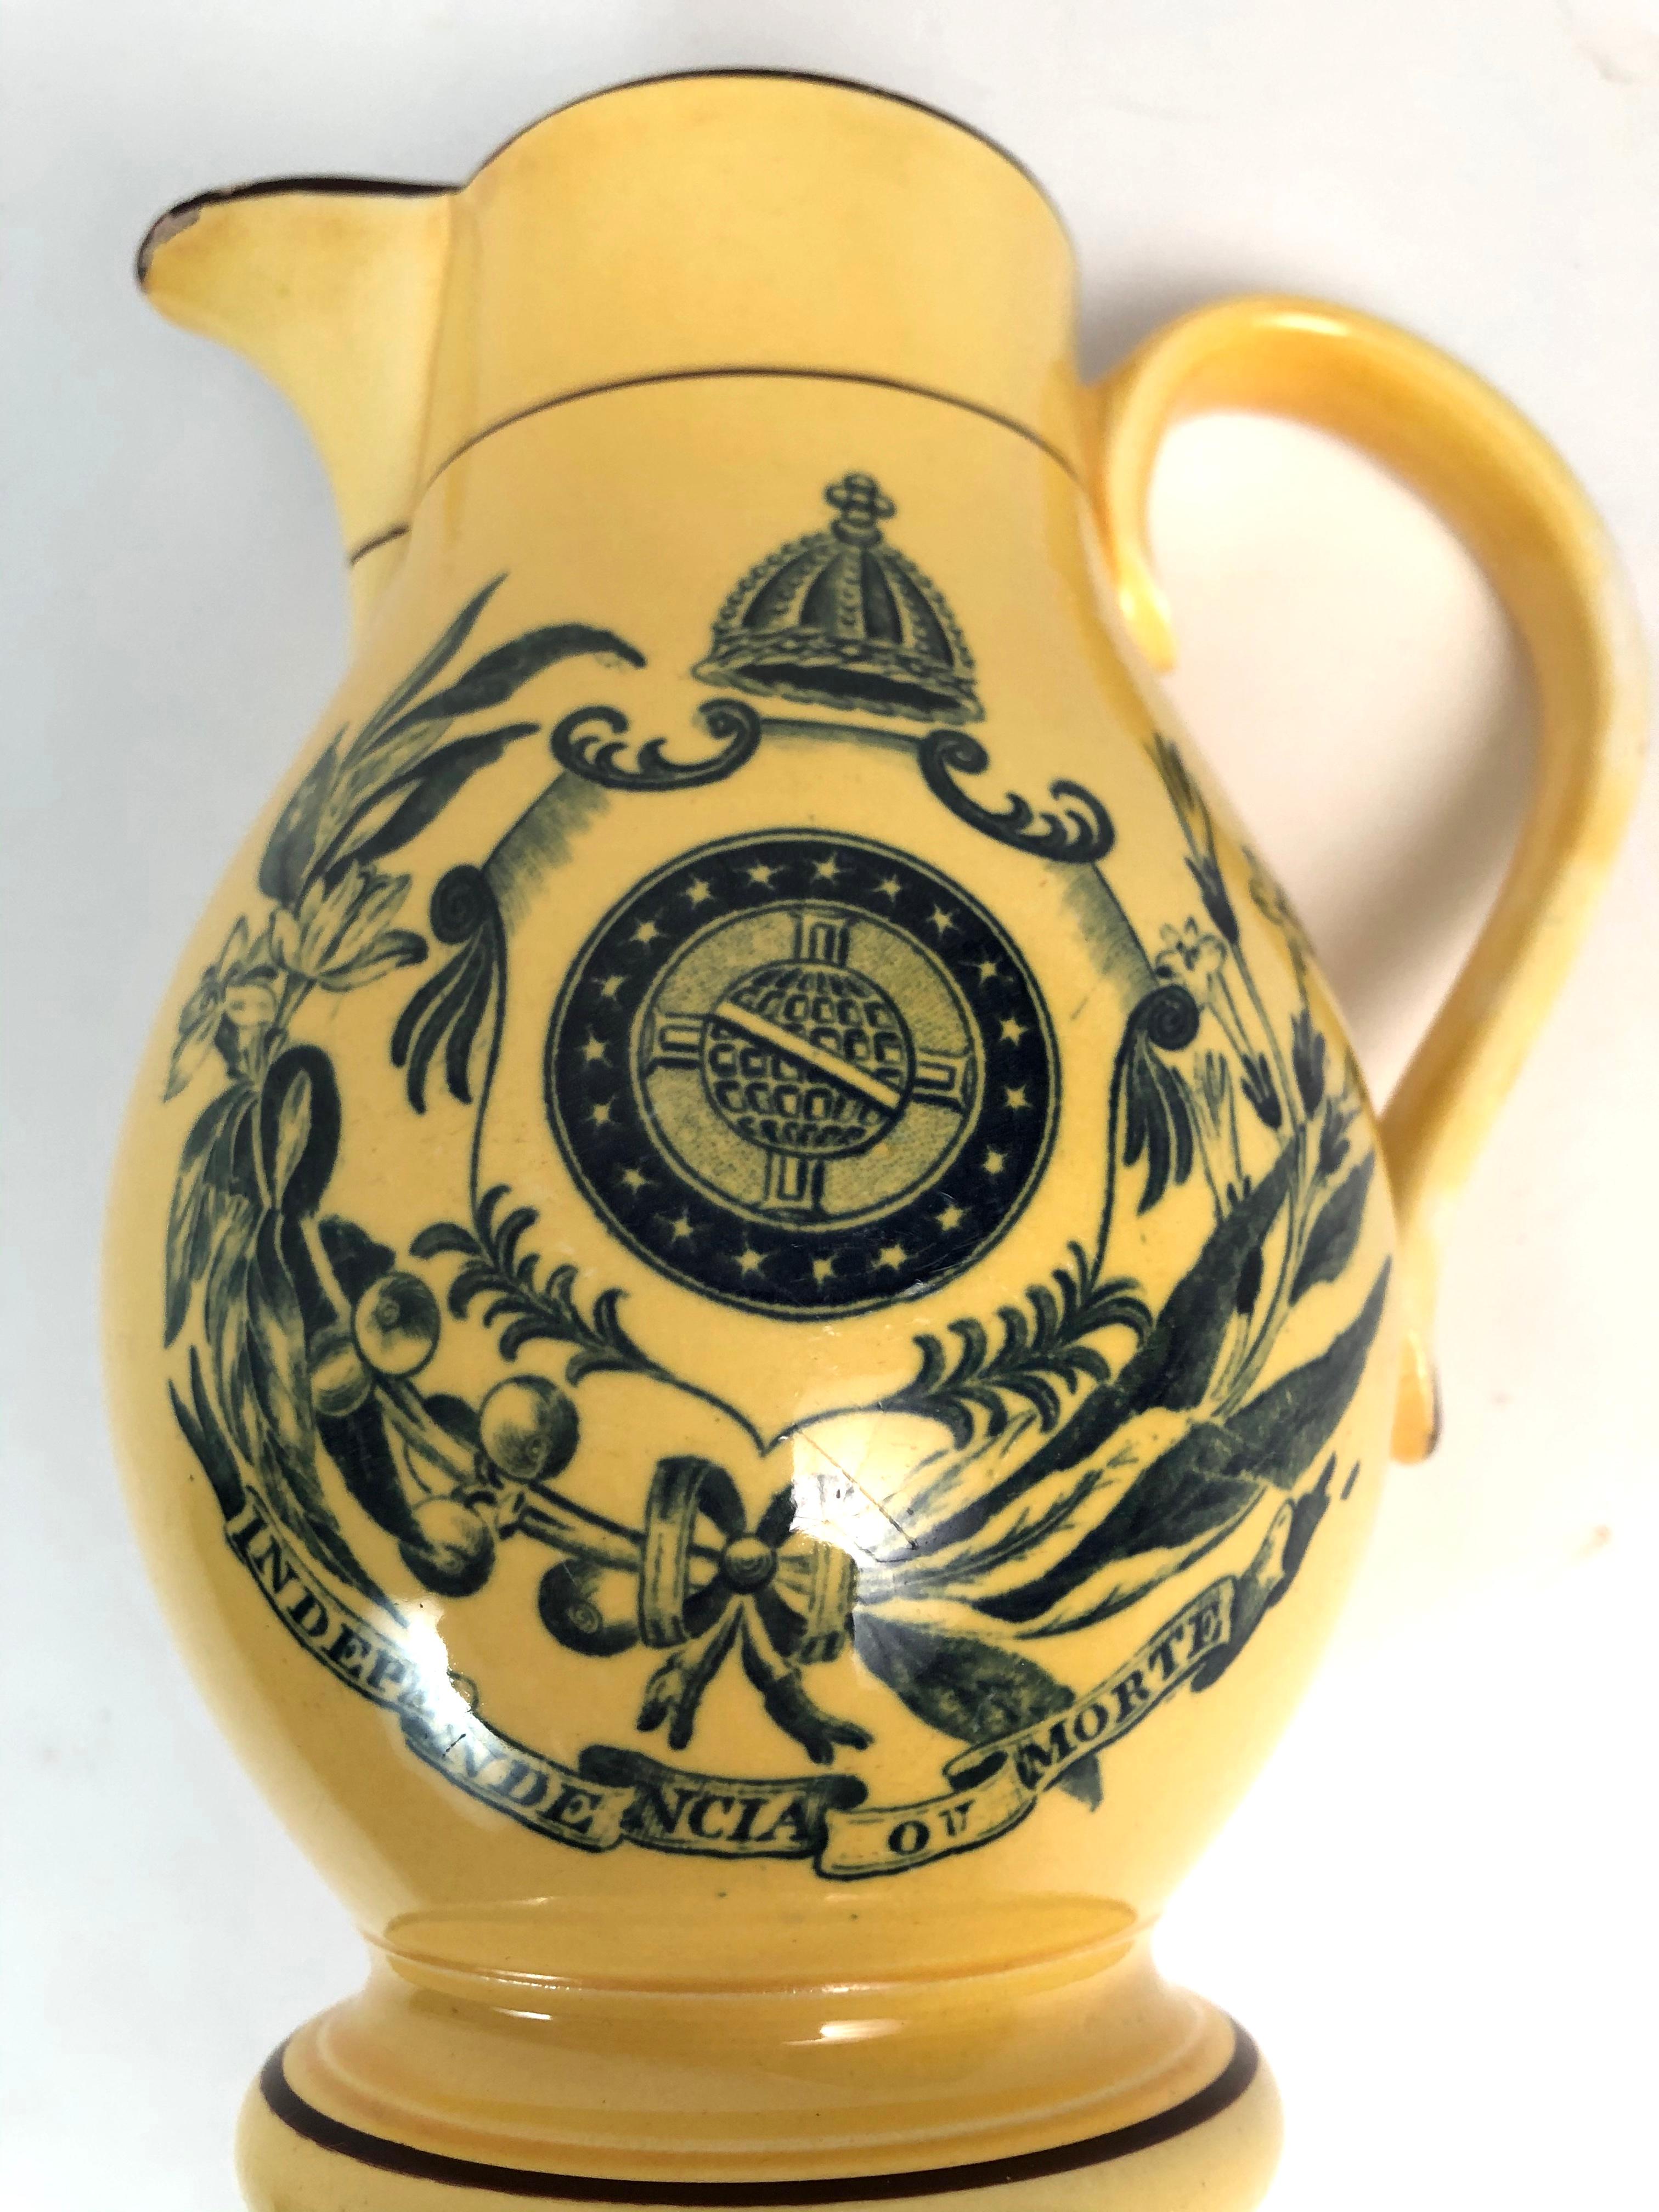 Earthenware Yellow Glazed Staffordshire Pottery Brazil Independence Pitcher, circa 1825